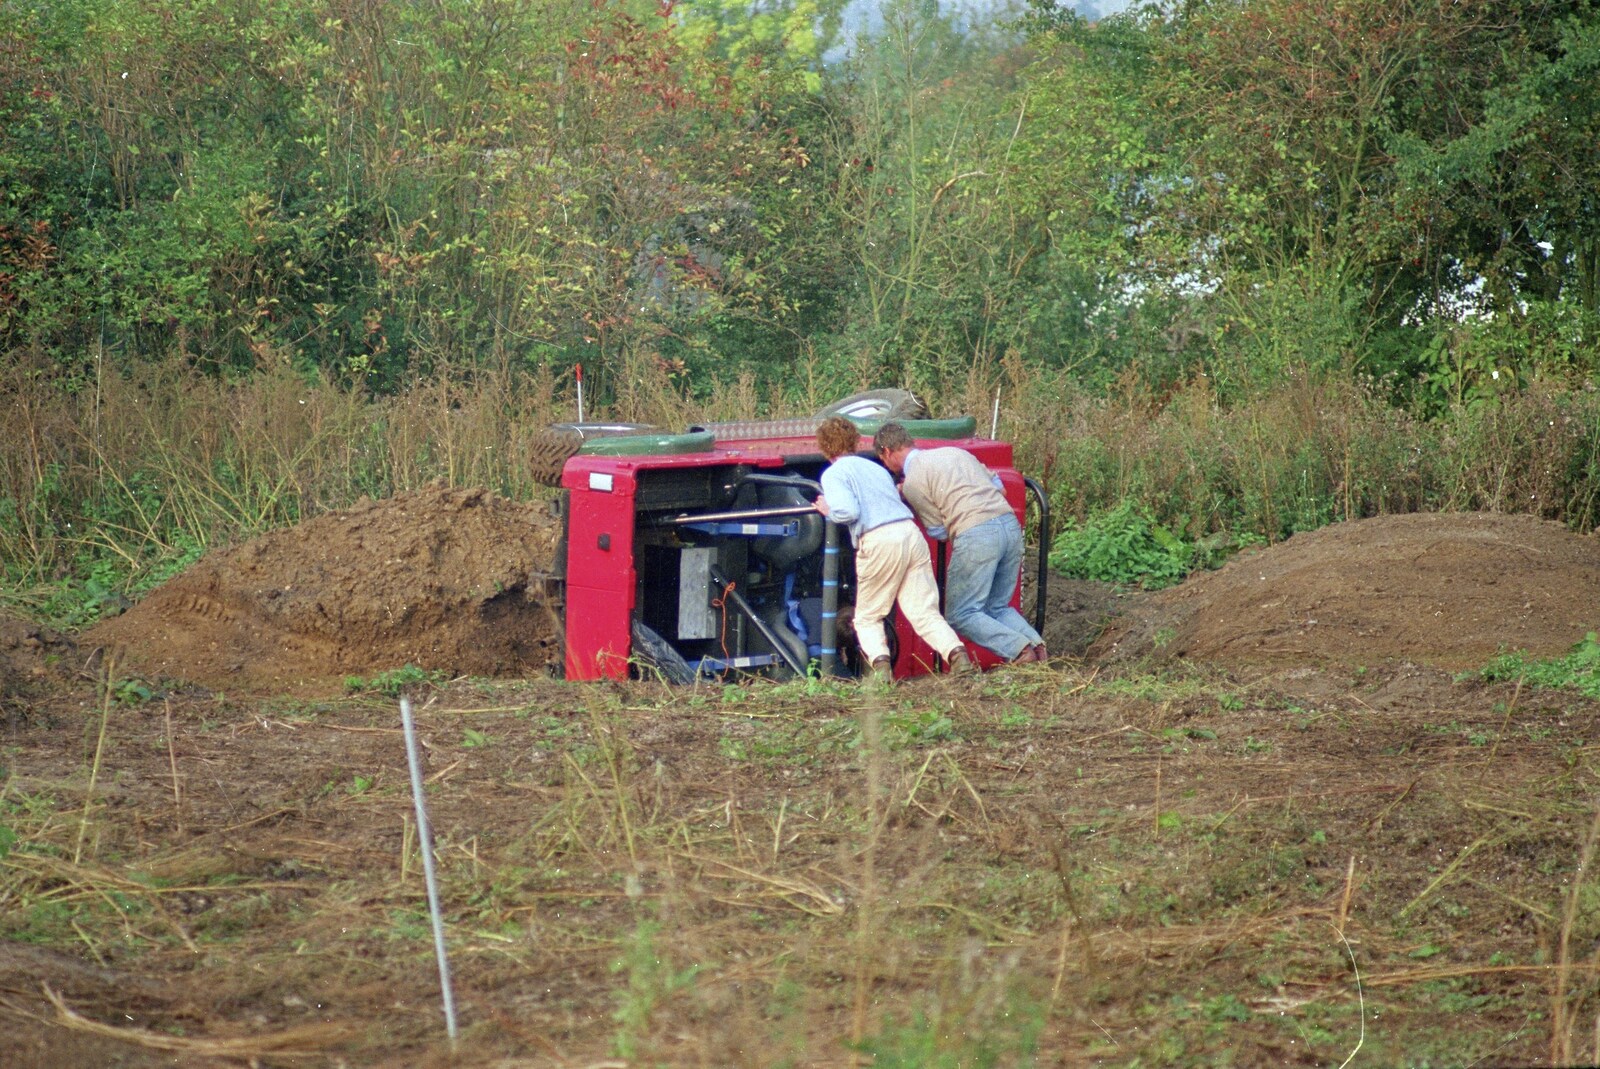 Trying to push over the toppled Daihatsu from Cider Making With Geoff and Brenda, Stuston, Suffolk - 10th September 1998